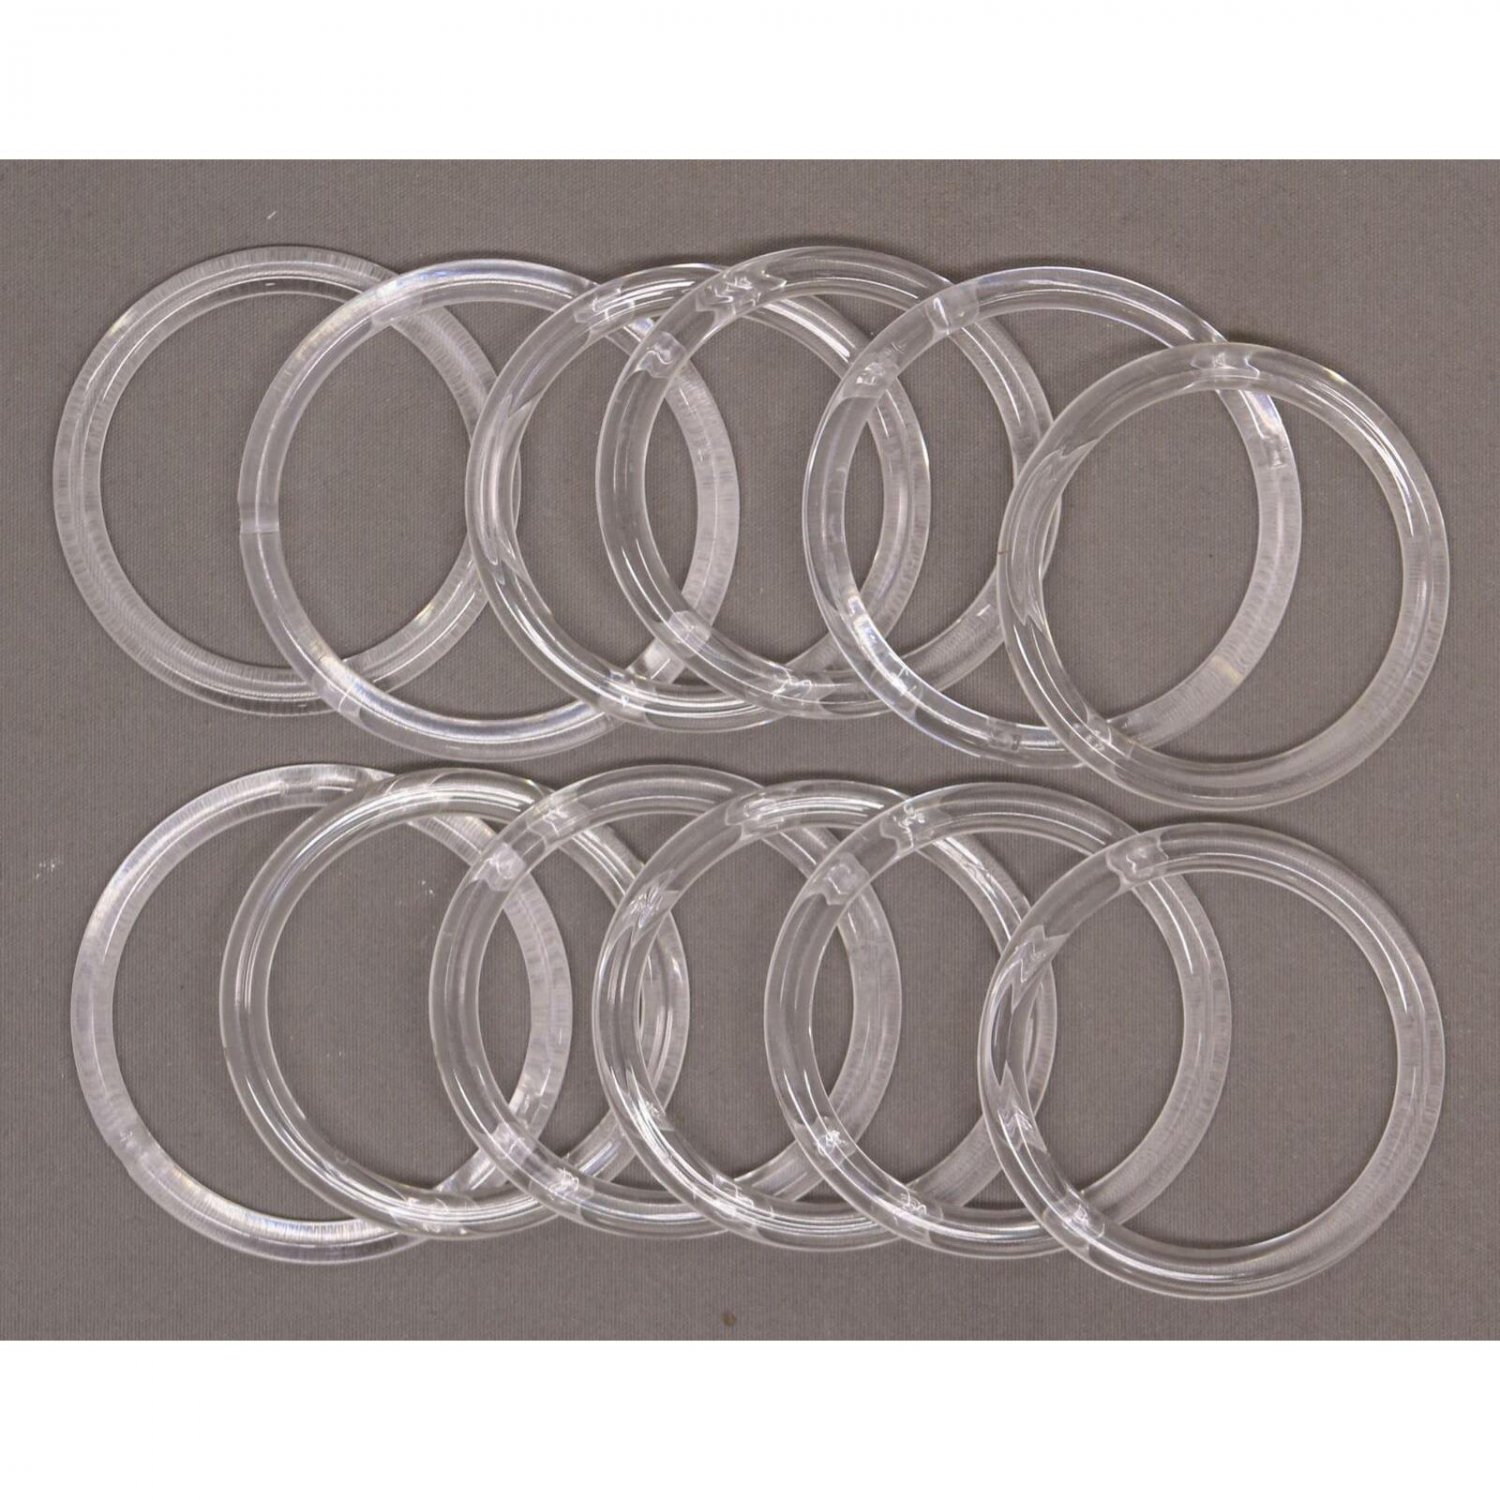 ZUZIFY Clear 3-Inch Diameter Scarf Rings Holder Clear - LOT OF 12